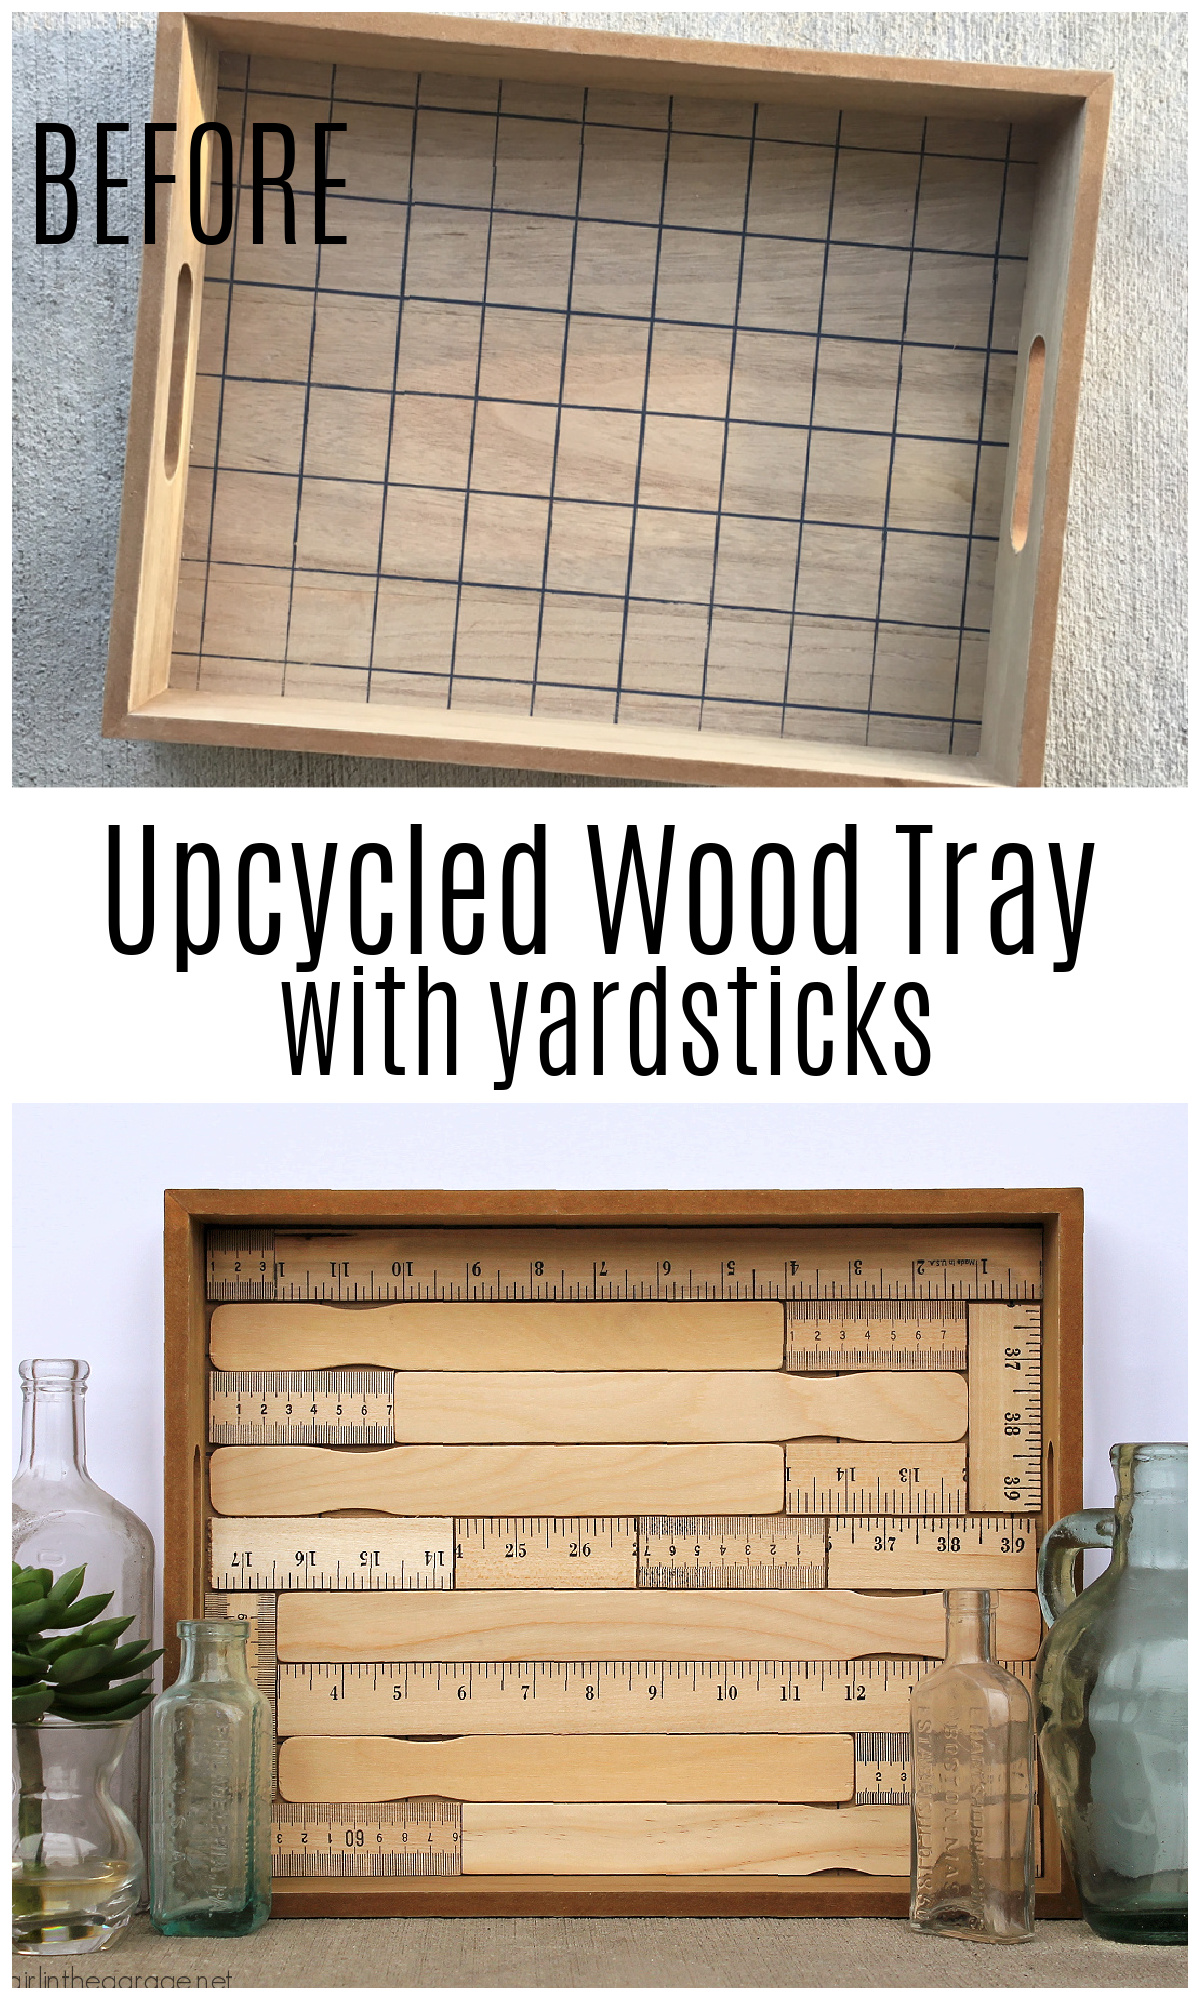 How to make an adorable upcycled wood tray with yardsticks and paint stirrers. Easy DIY home decor idea by Girl in the Garage